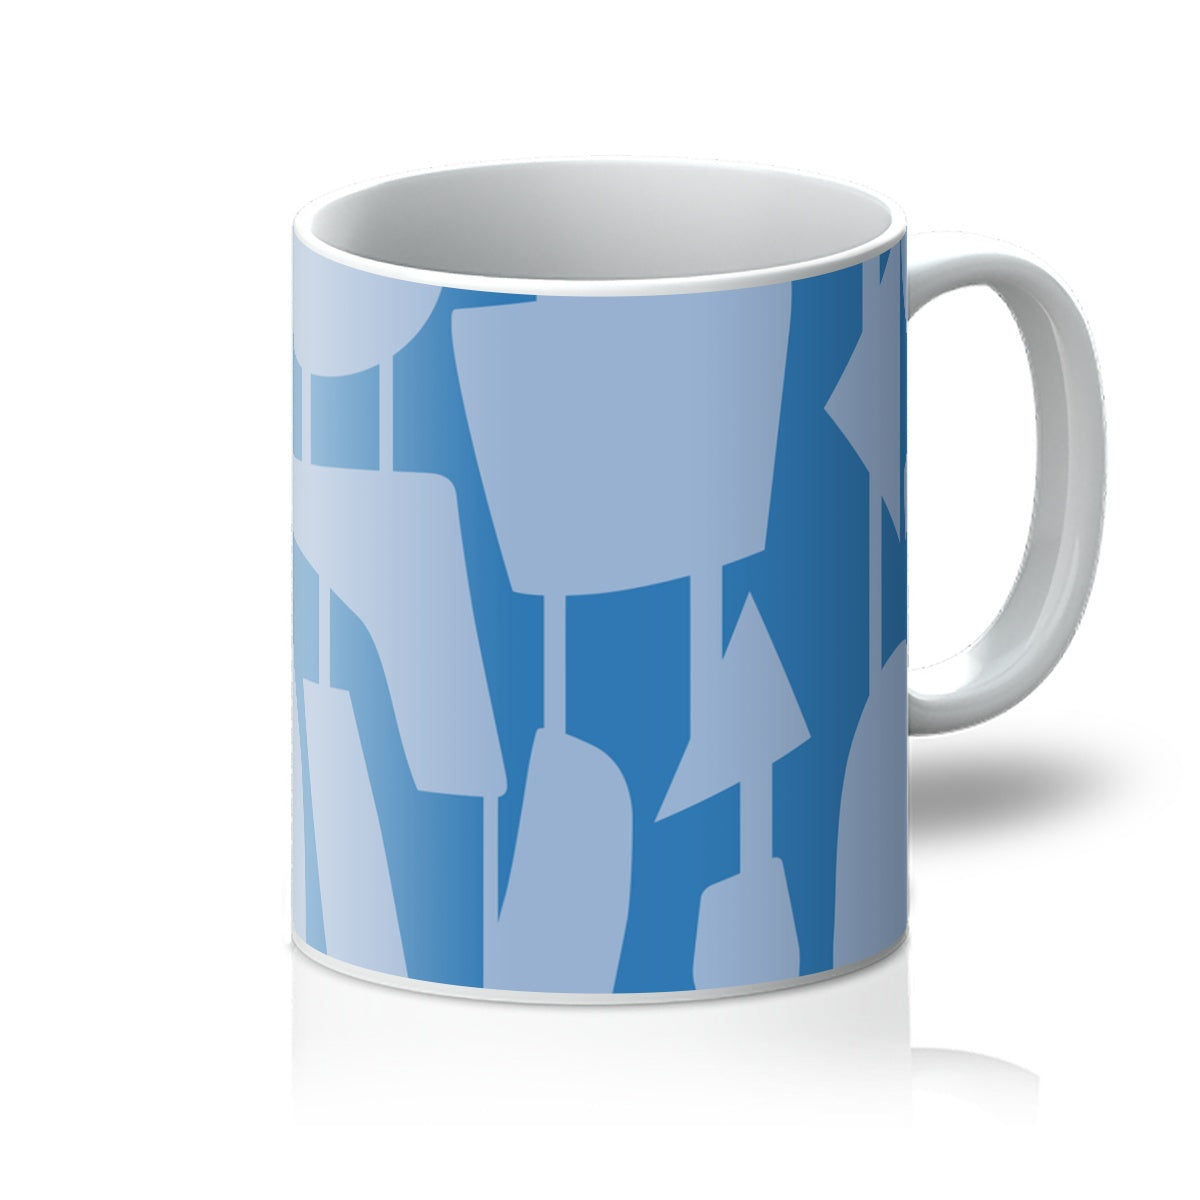 This Mid-Century Modern style ceramic coffee mug consists of colorful connected shapes in Cerulean blue on a French blue background